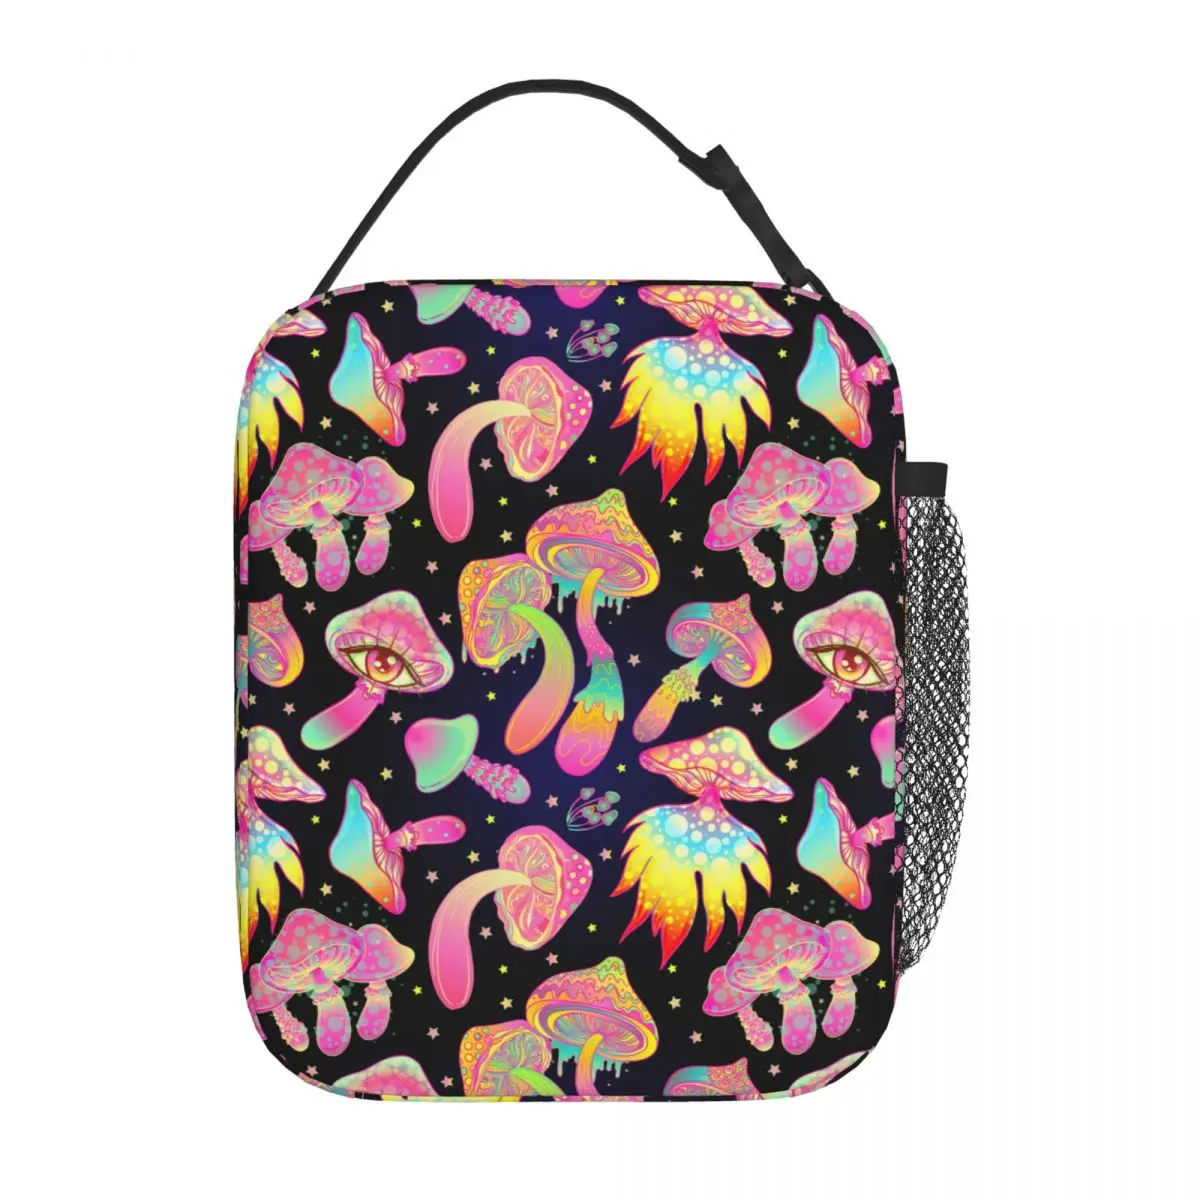 

Hippie Magic Mushrooms Insulated Lunch Bags Psychedelic Aesthetic Mushroom Lunch Container Cooler Thermal Bento Box Travel